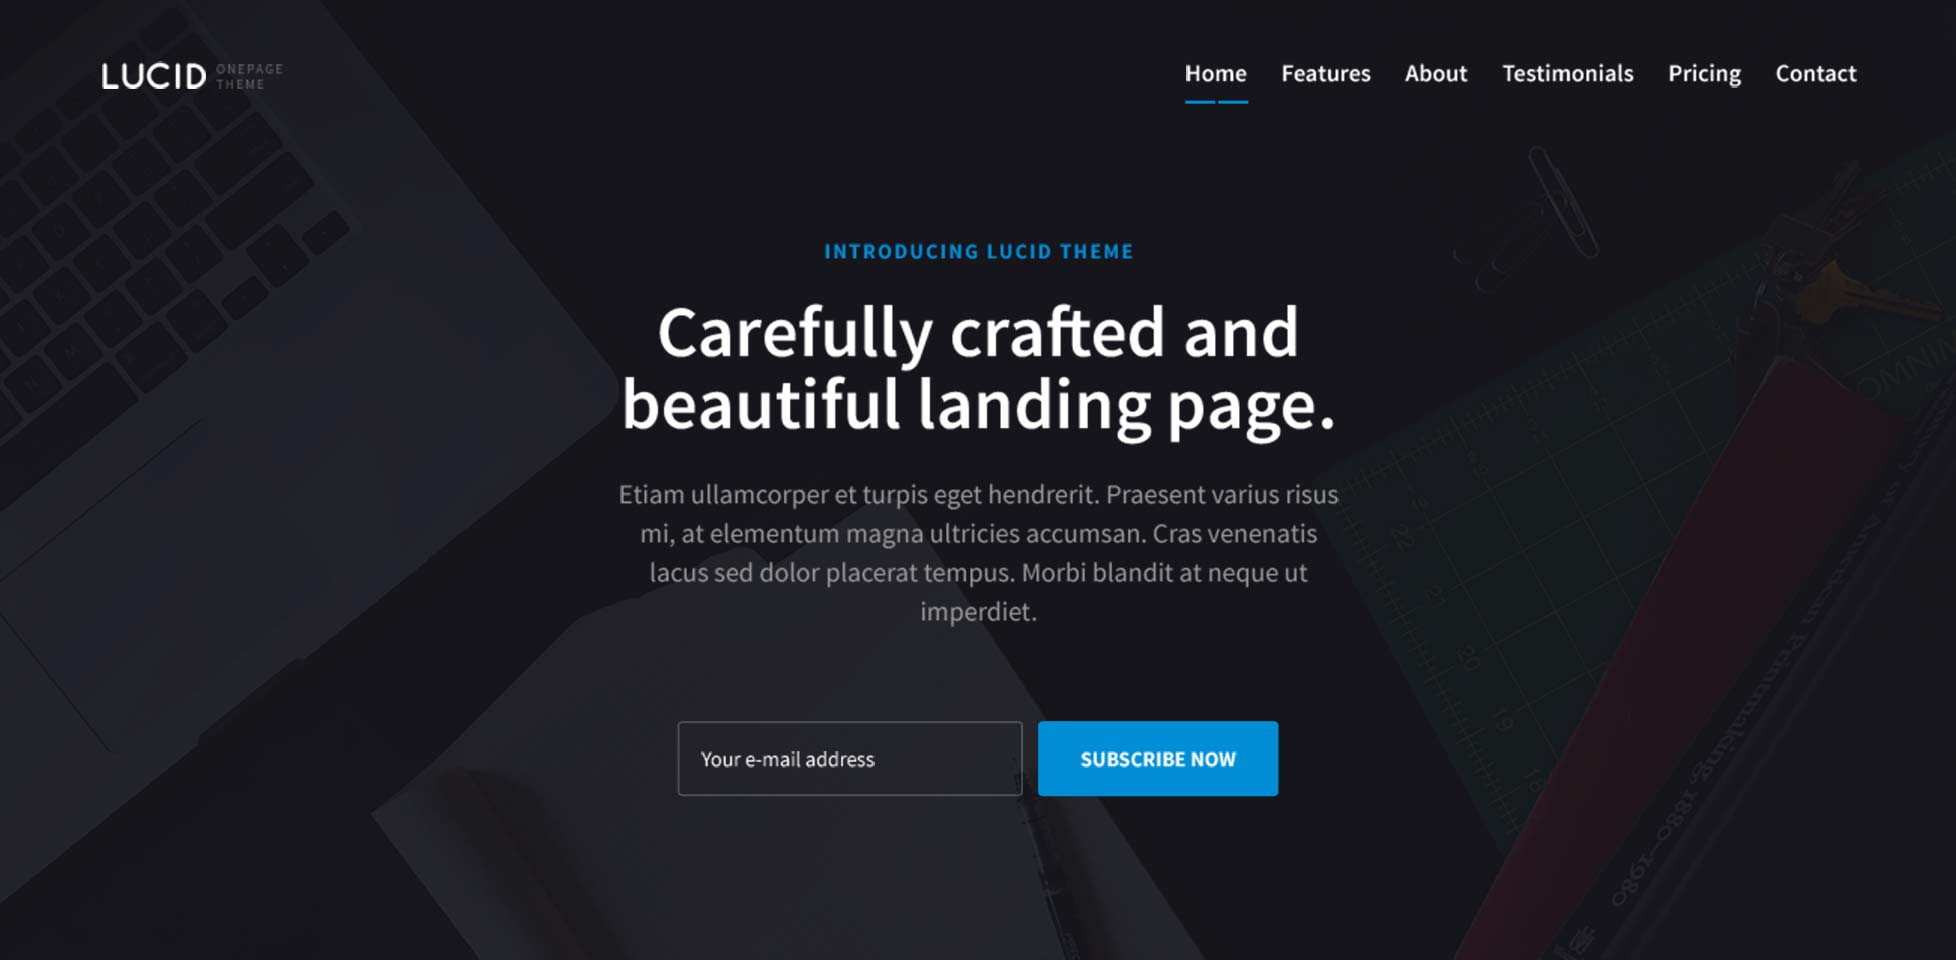 Free download: Lucid one page PSD template